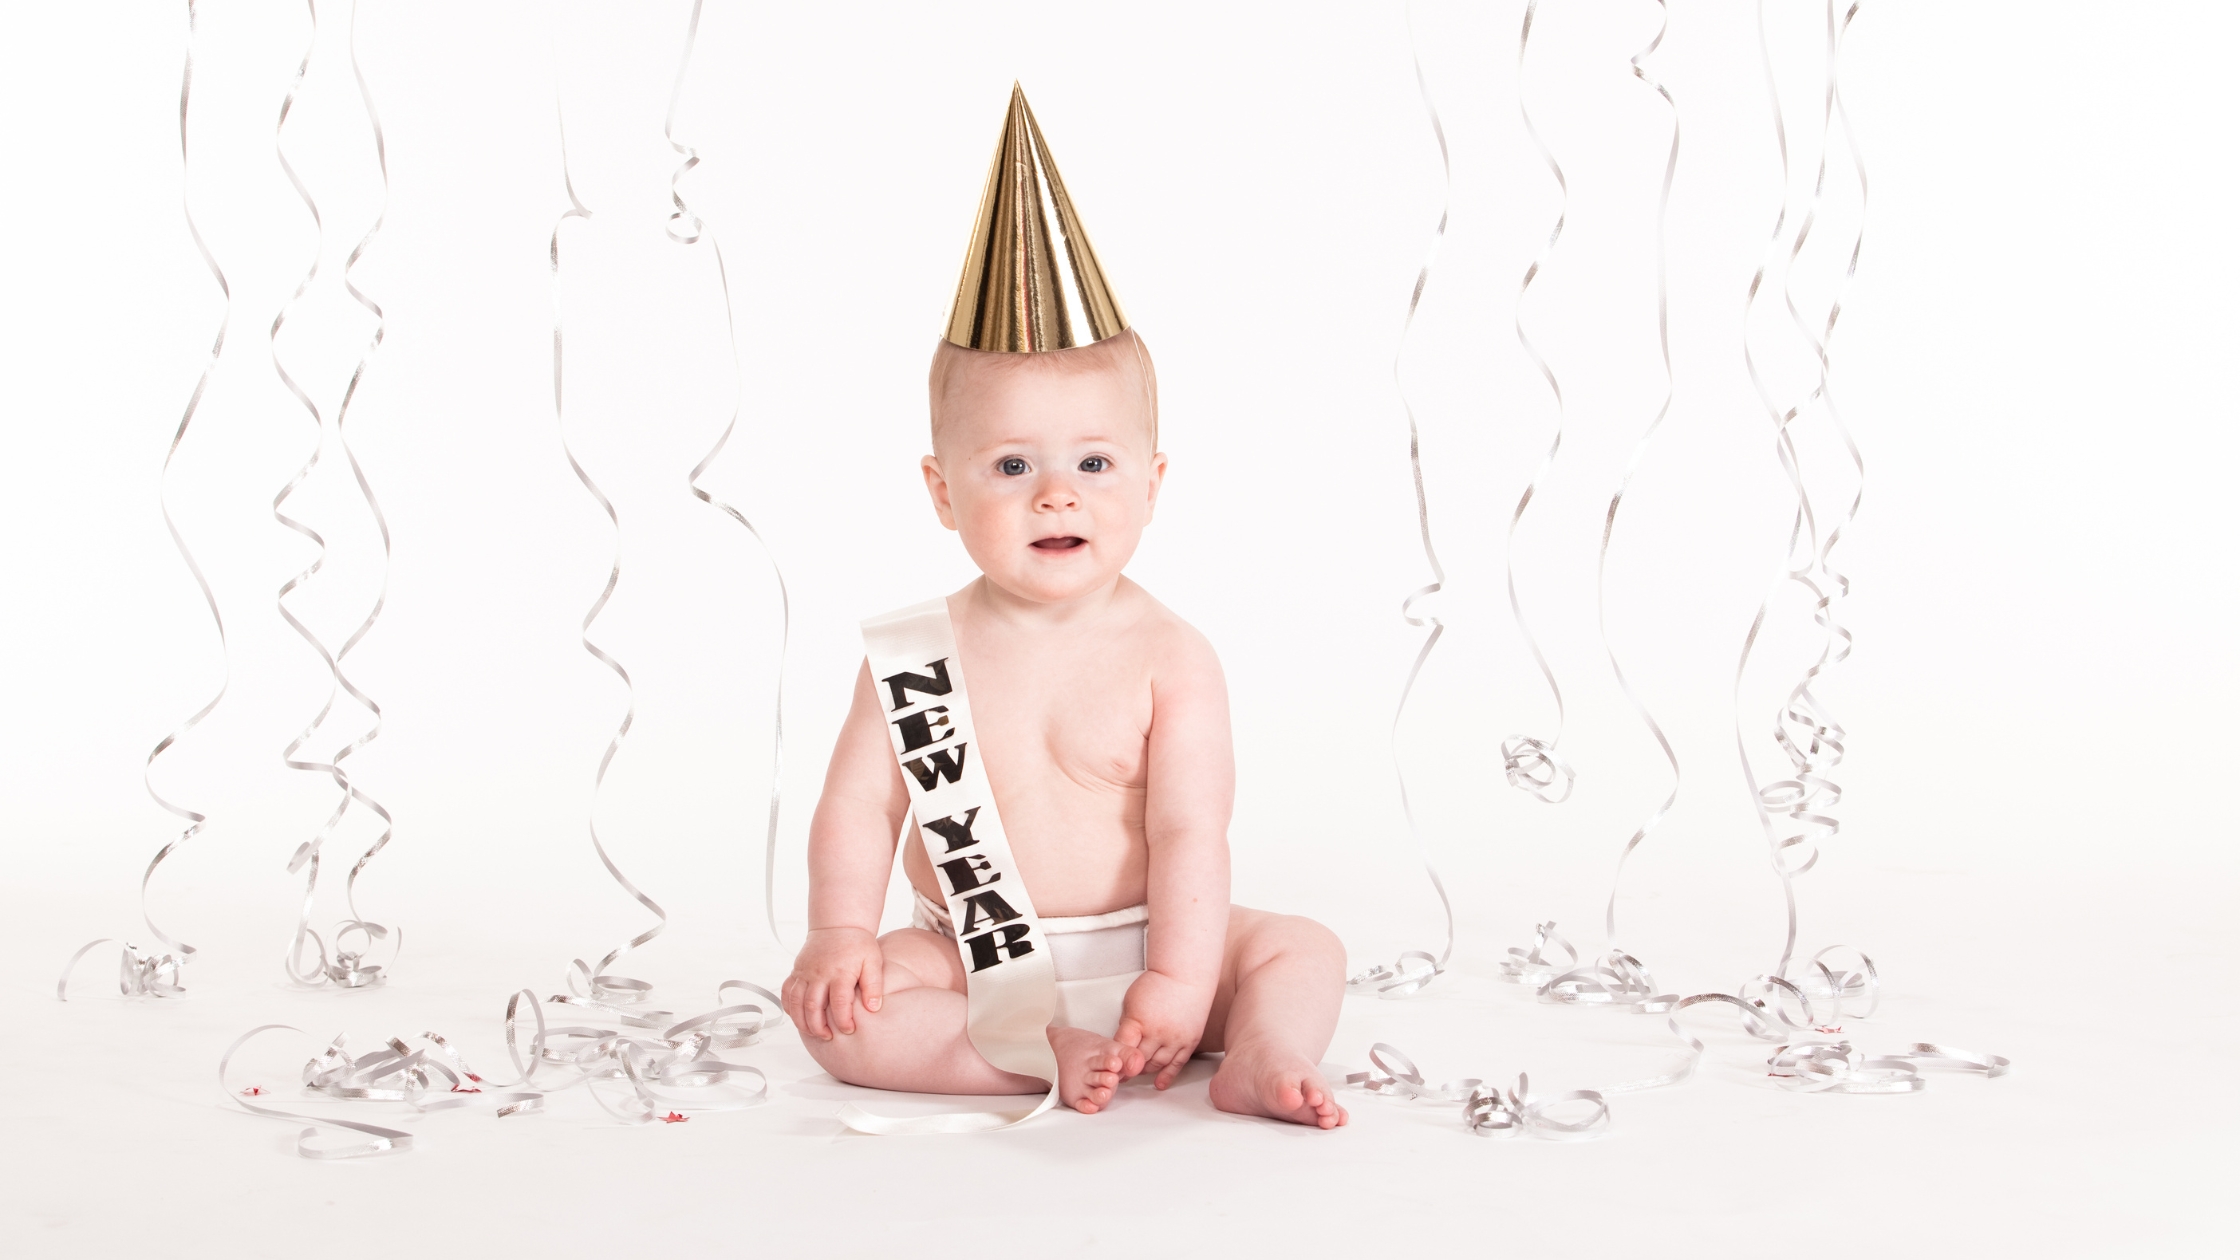 a baby celebrating the new year with a hat and sash